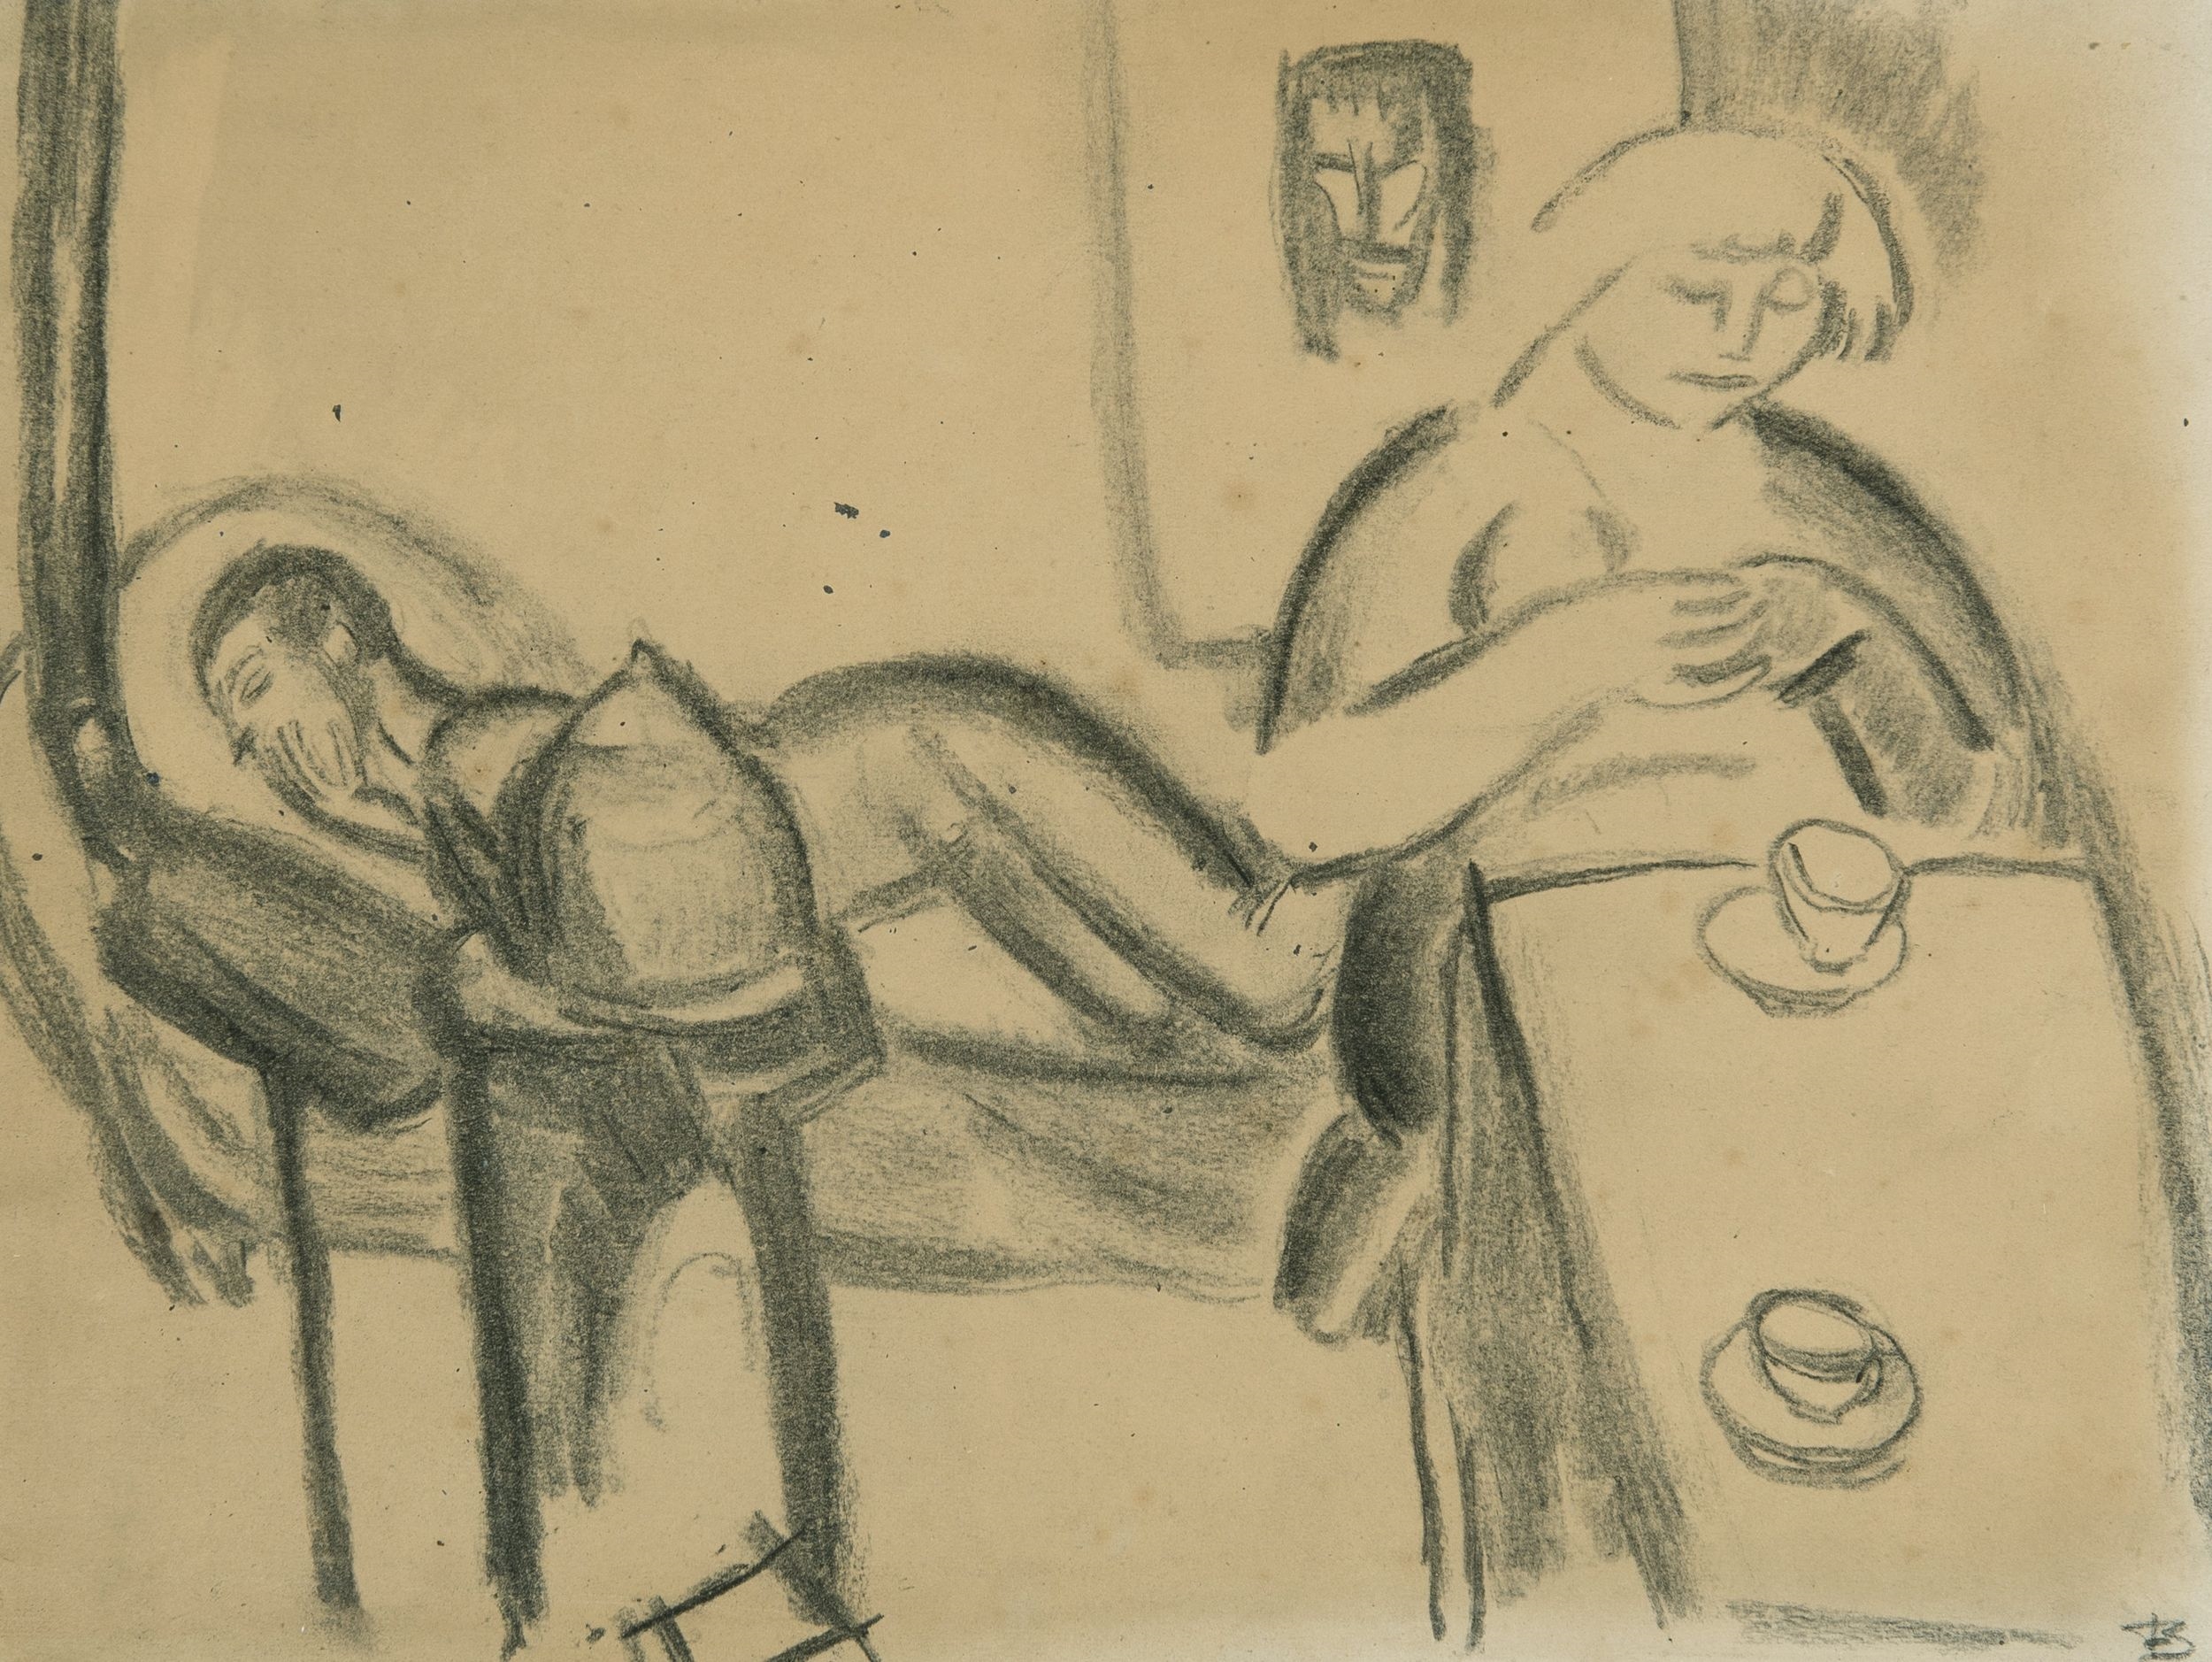 Interior with Sleeping Man and Woman Sitting at a Table by Frits van den Berghe, 1919